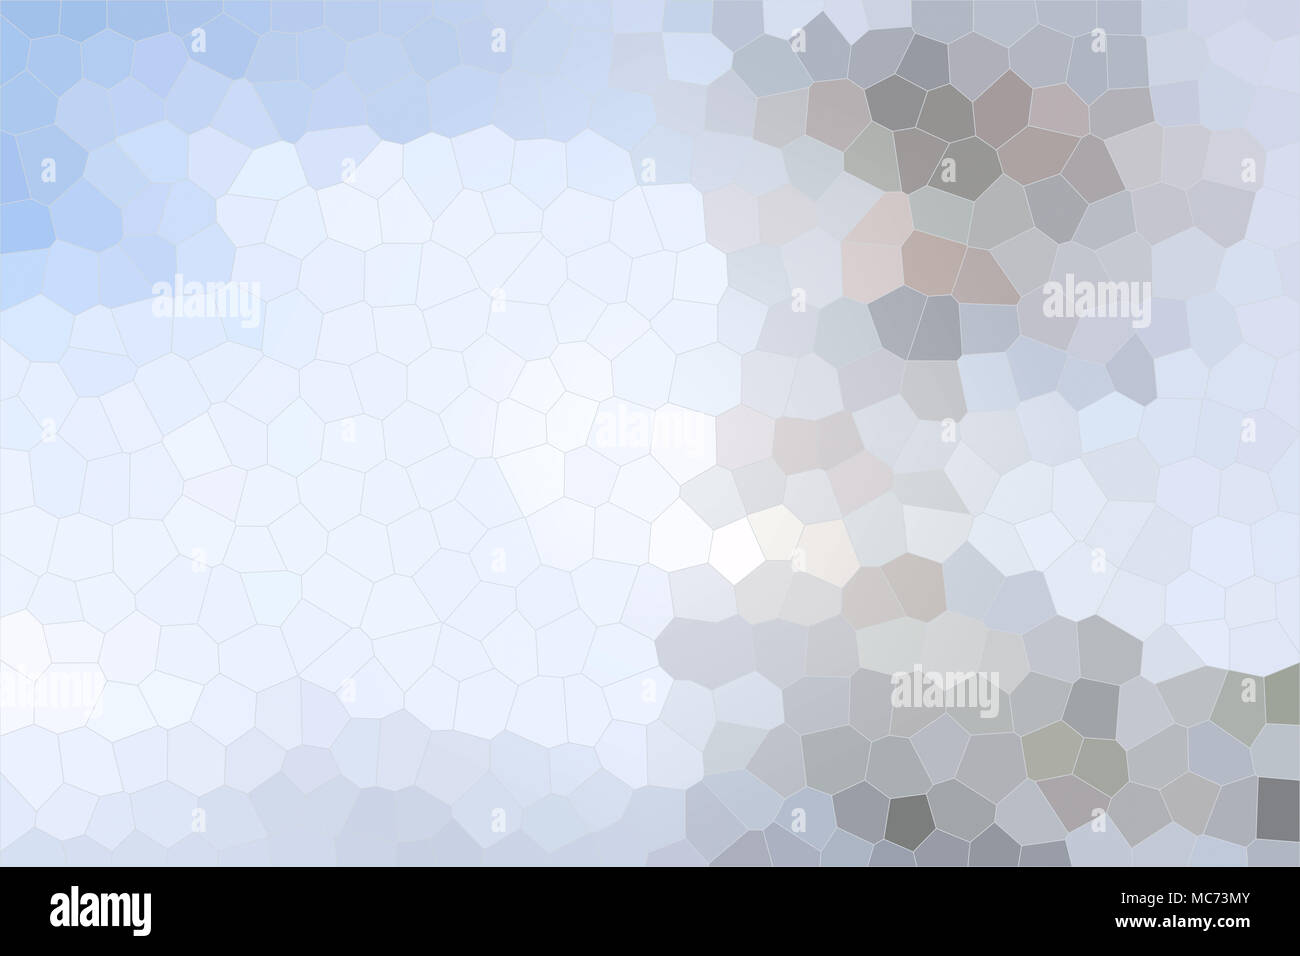 Simple low poly silver background of pentagon, hexagon and heptagon shapes in various colors Stock Photo